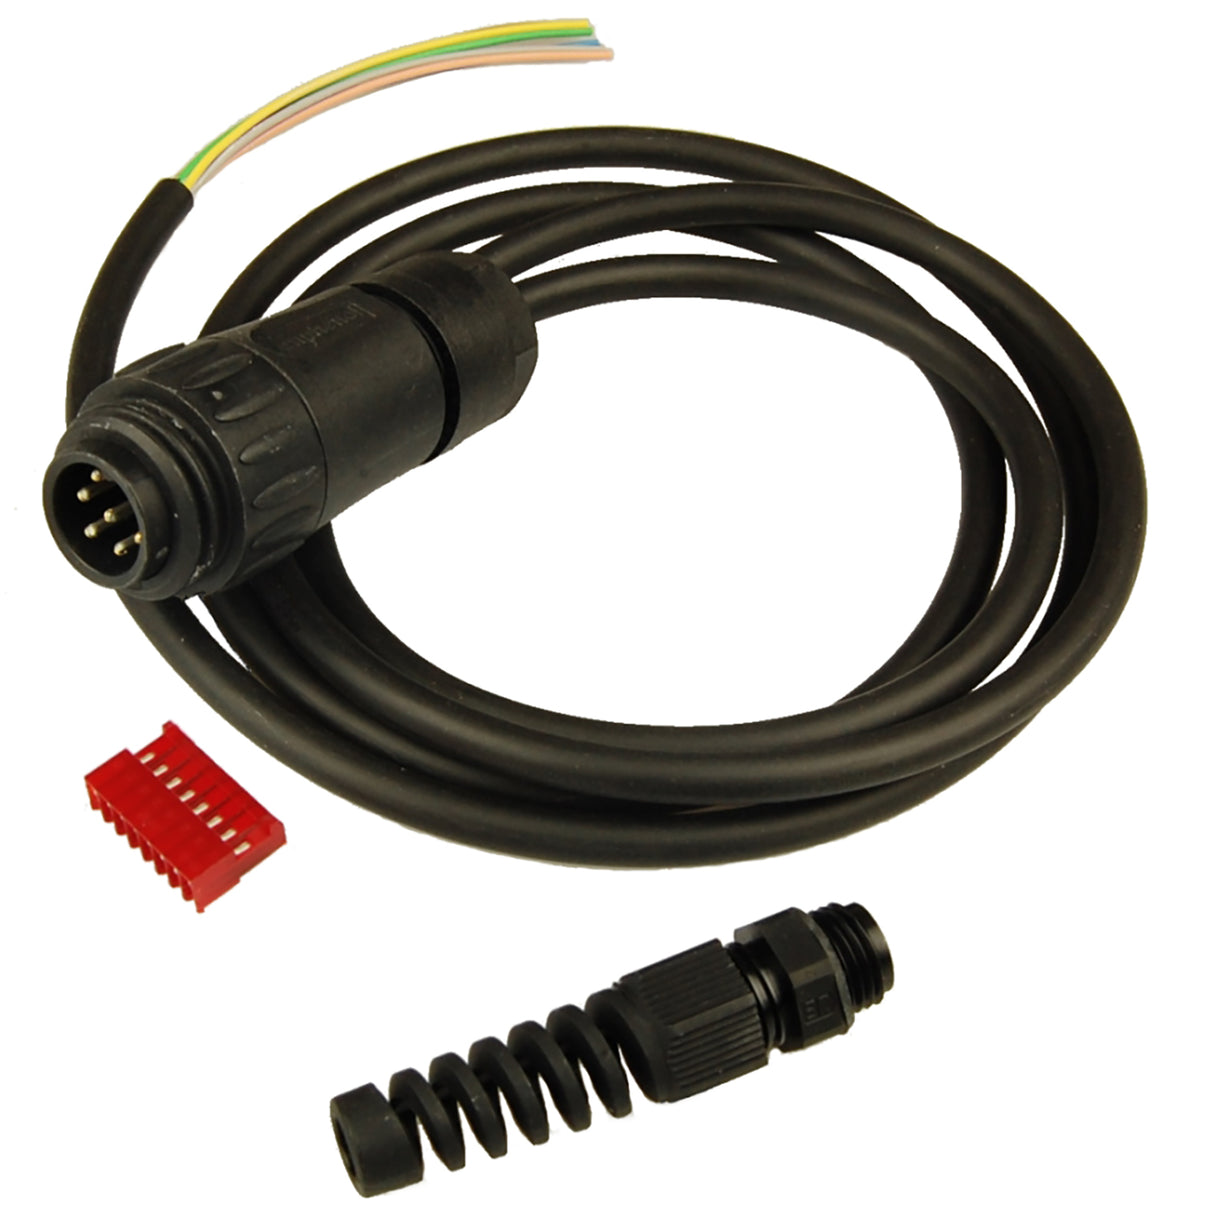 E-Link-Kabel-roter Stecker Lely Discovery